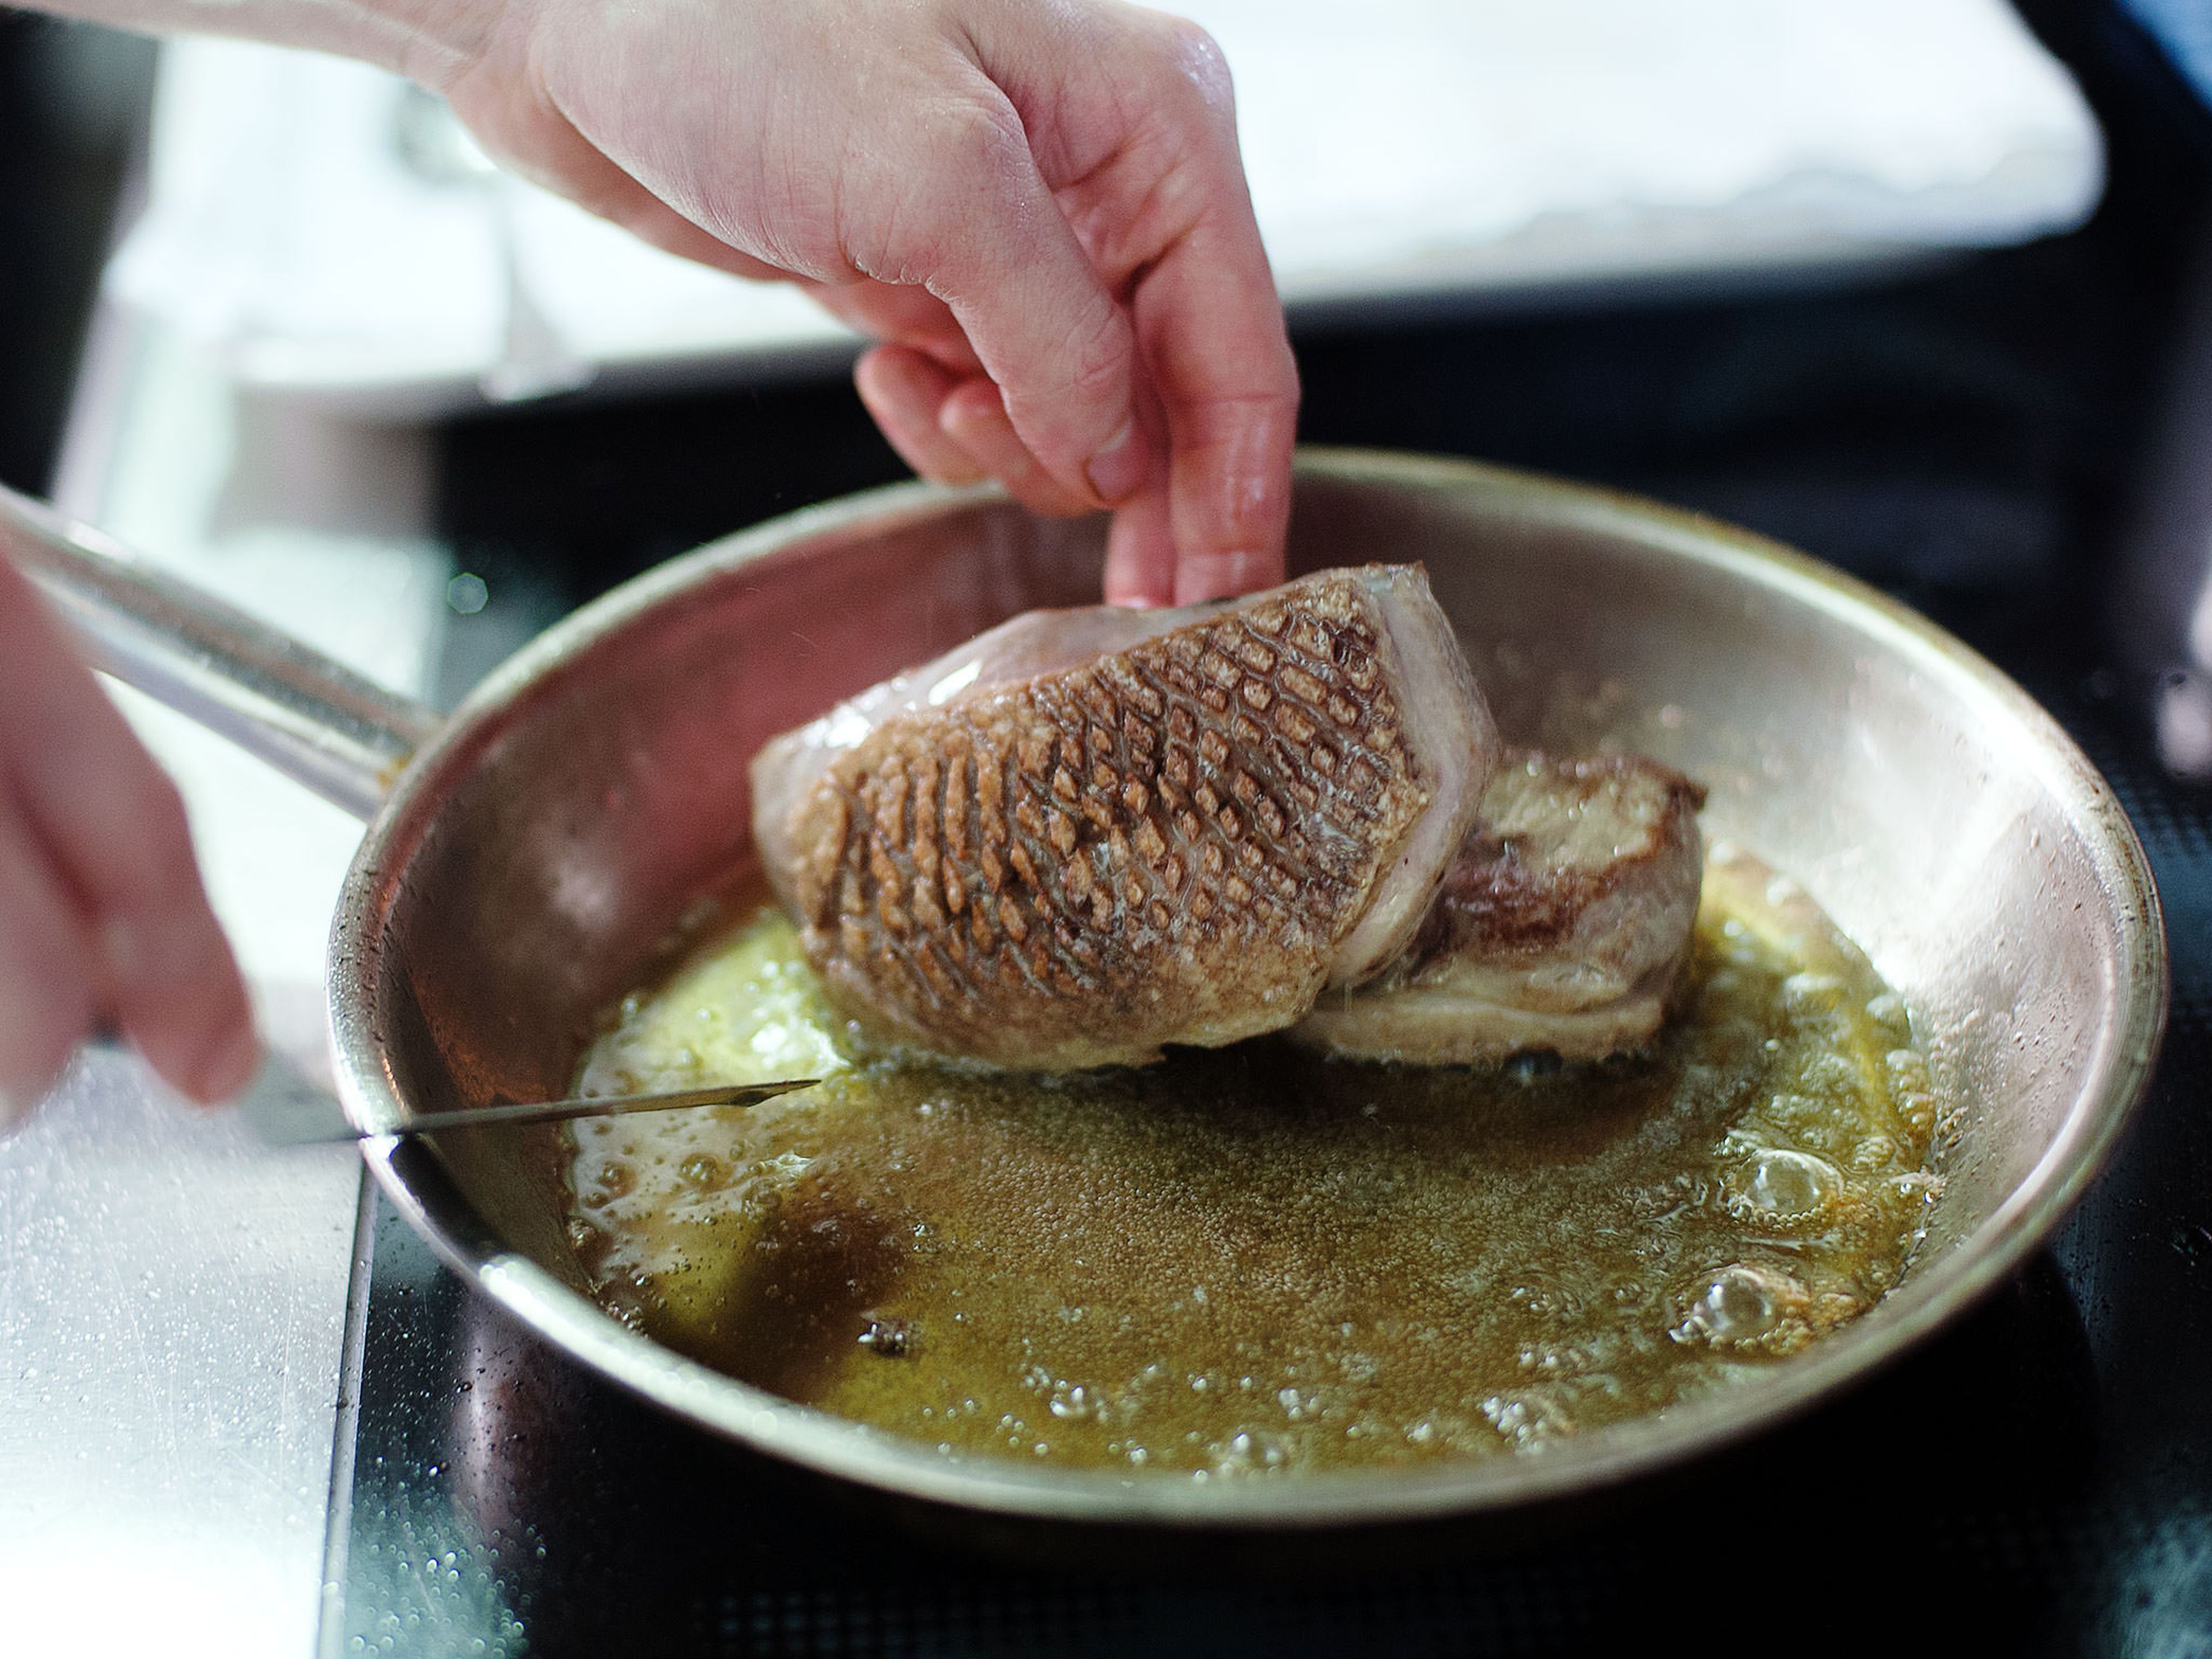 Heat oil in a frying pan set over medium-high heat. Sear duck breast. Spoon hot oil over the skin, then flip duck breast. Remove from frying pan and let oil drain from meat.